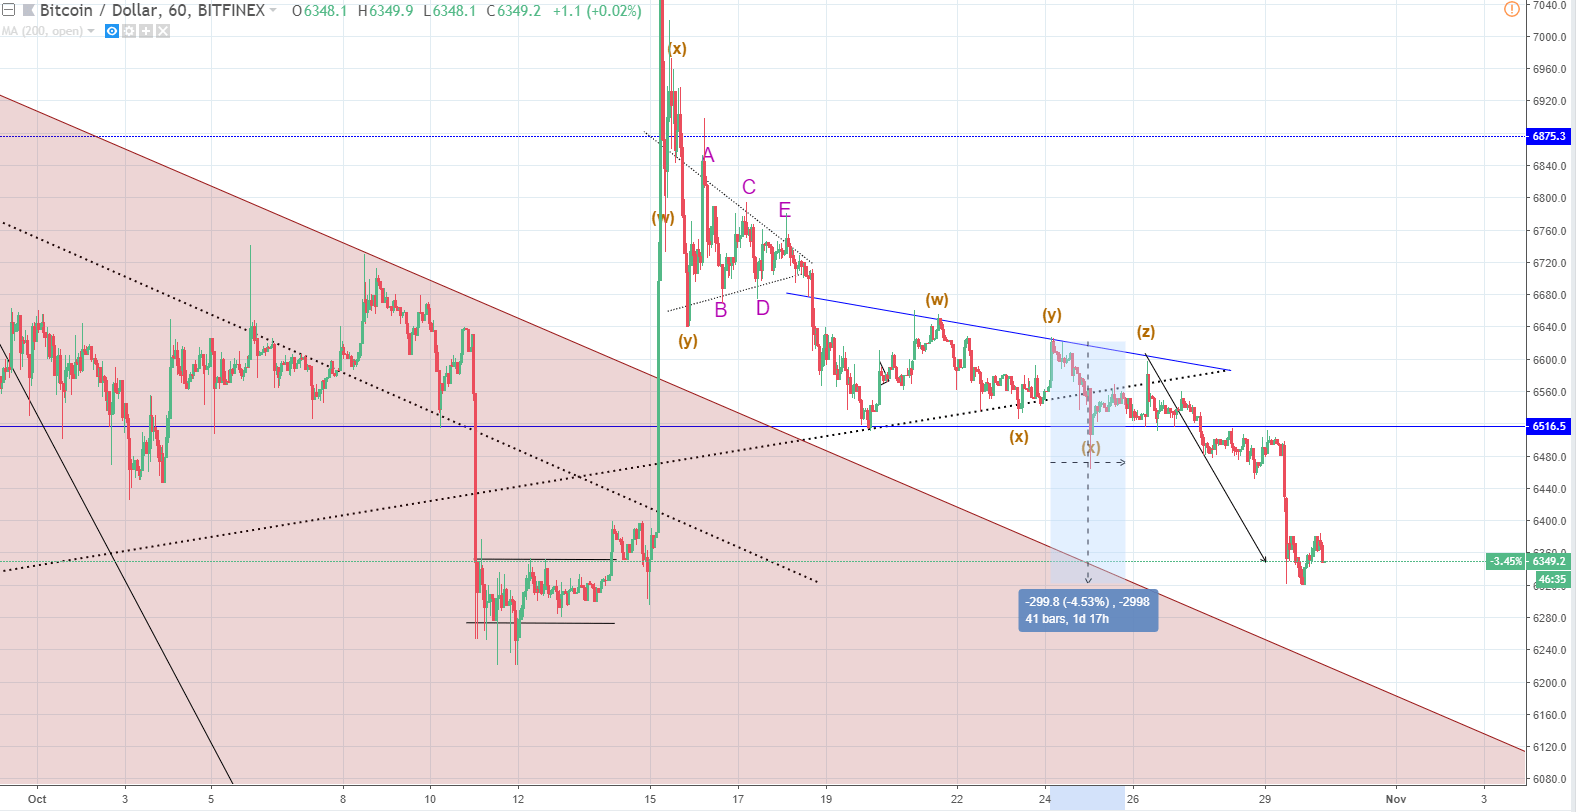 Both BTC/USD and XRP/USD Under Selling Pressure